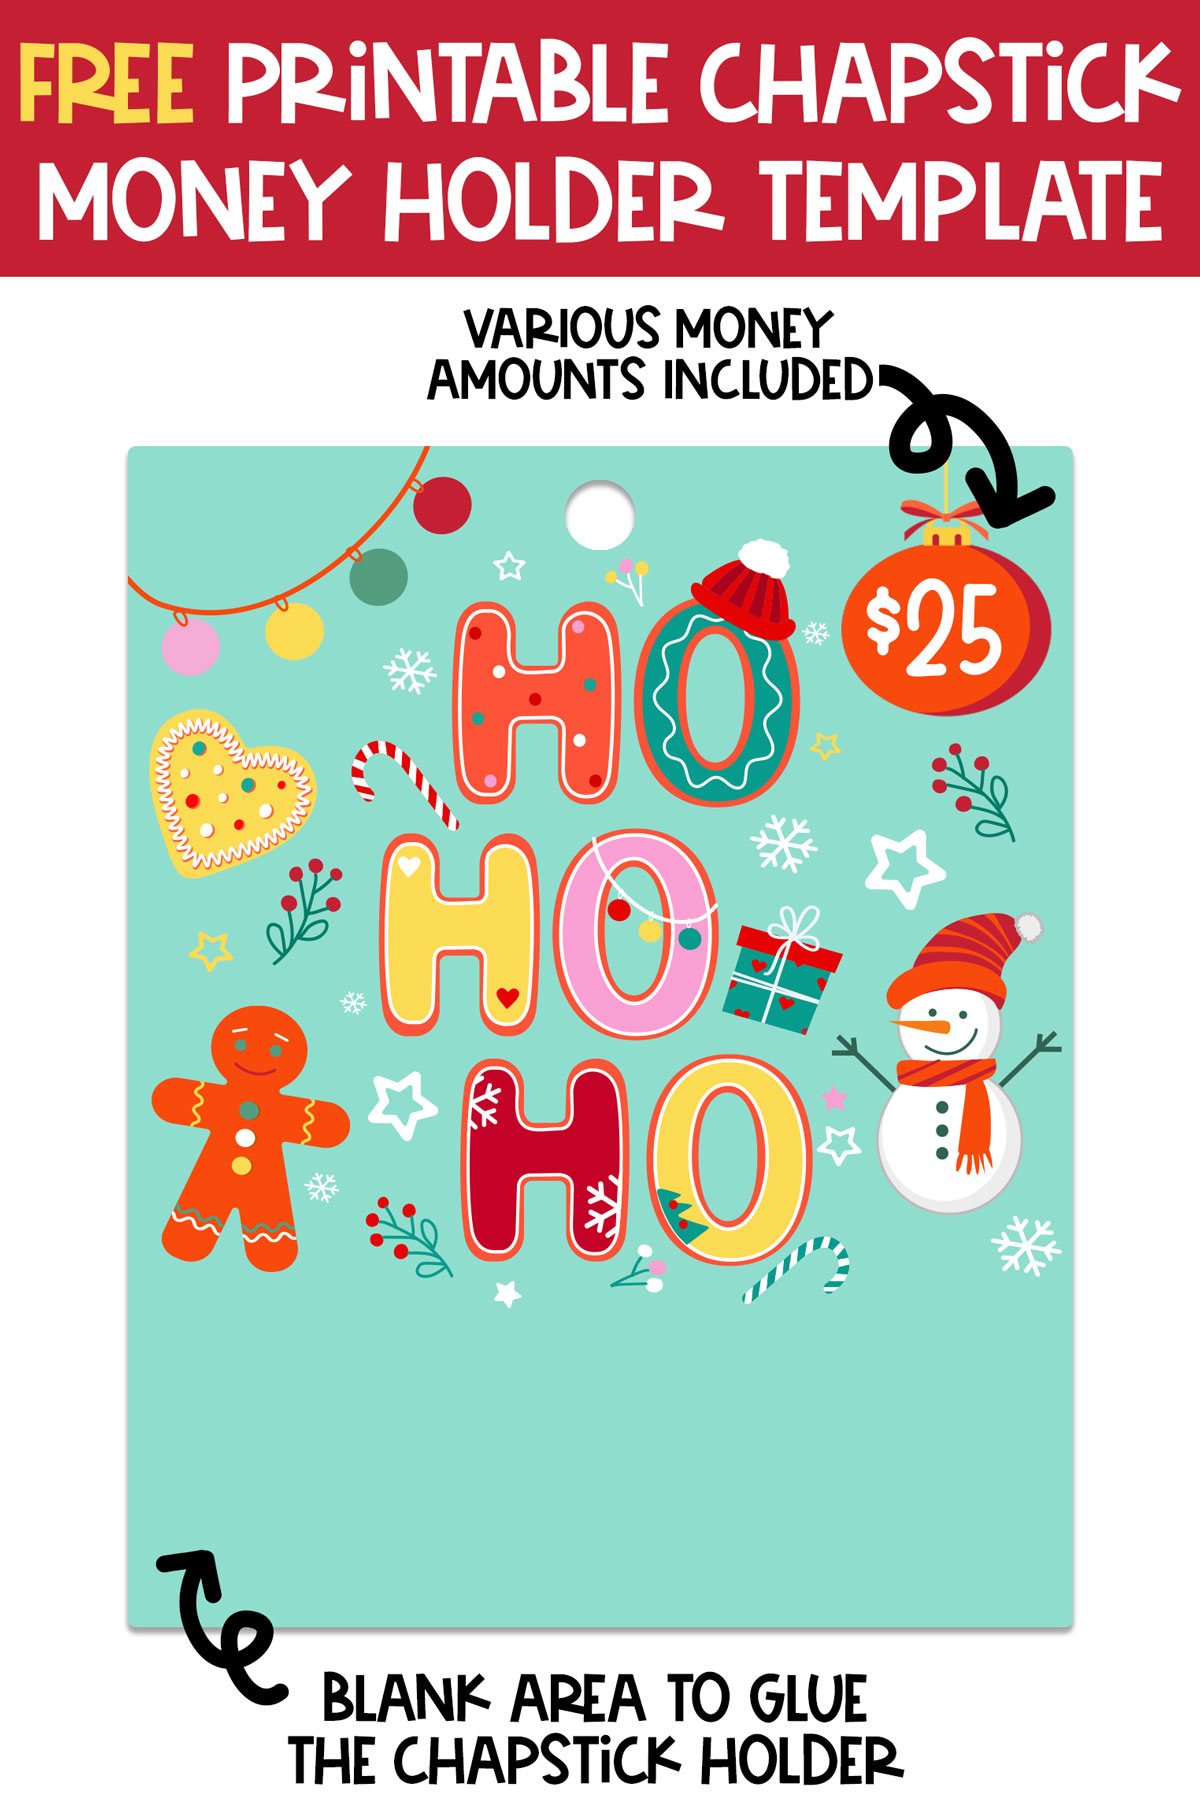 At the top it says free printable chapstick money holder template. Below that is the Ho Ho Ho gingerbread Christmas chapstick money holder card example you can get for free at the end of this blog post. It has an arrow pointing to the $25 and says various money amounts included. At the bottom there is an arrow pointing to the blank area saying blank area to glue the chapstick holder.